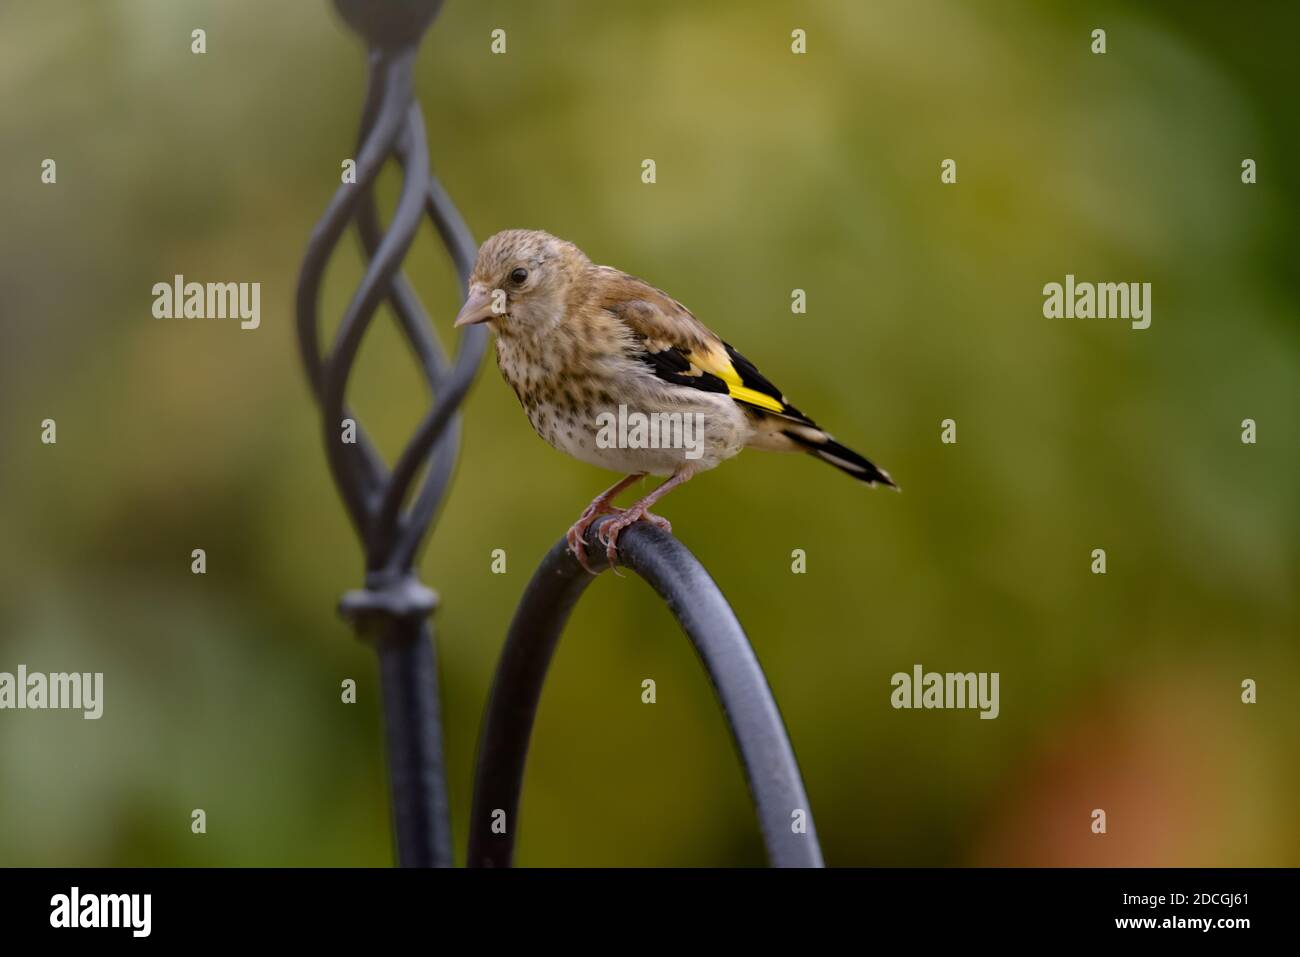 Fledgling Goldfinch Perched on a Bird Feeder Pole Stock Photo